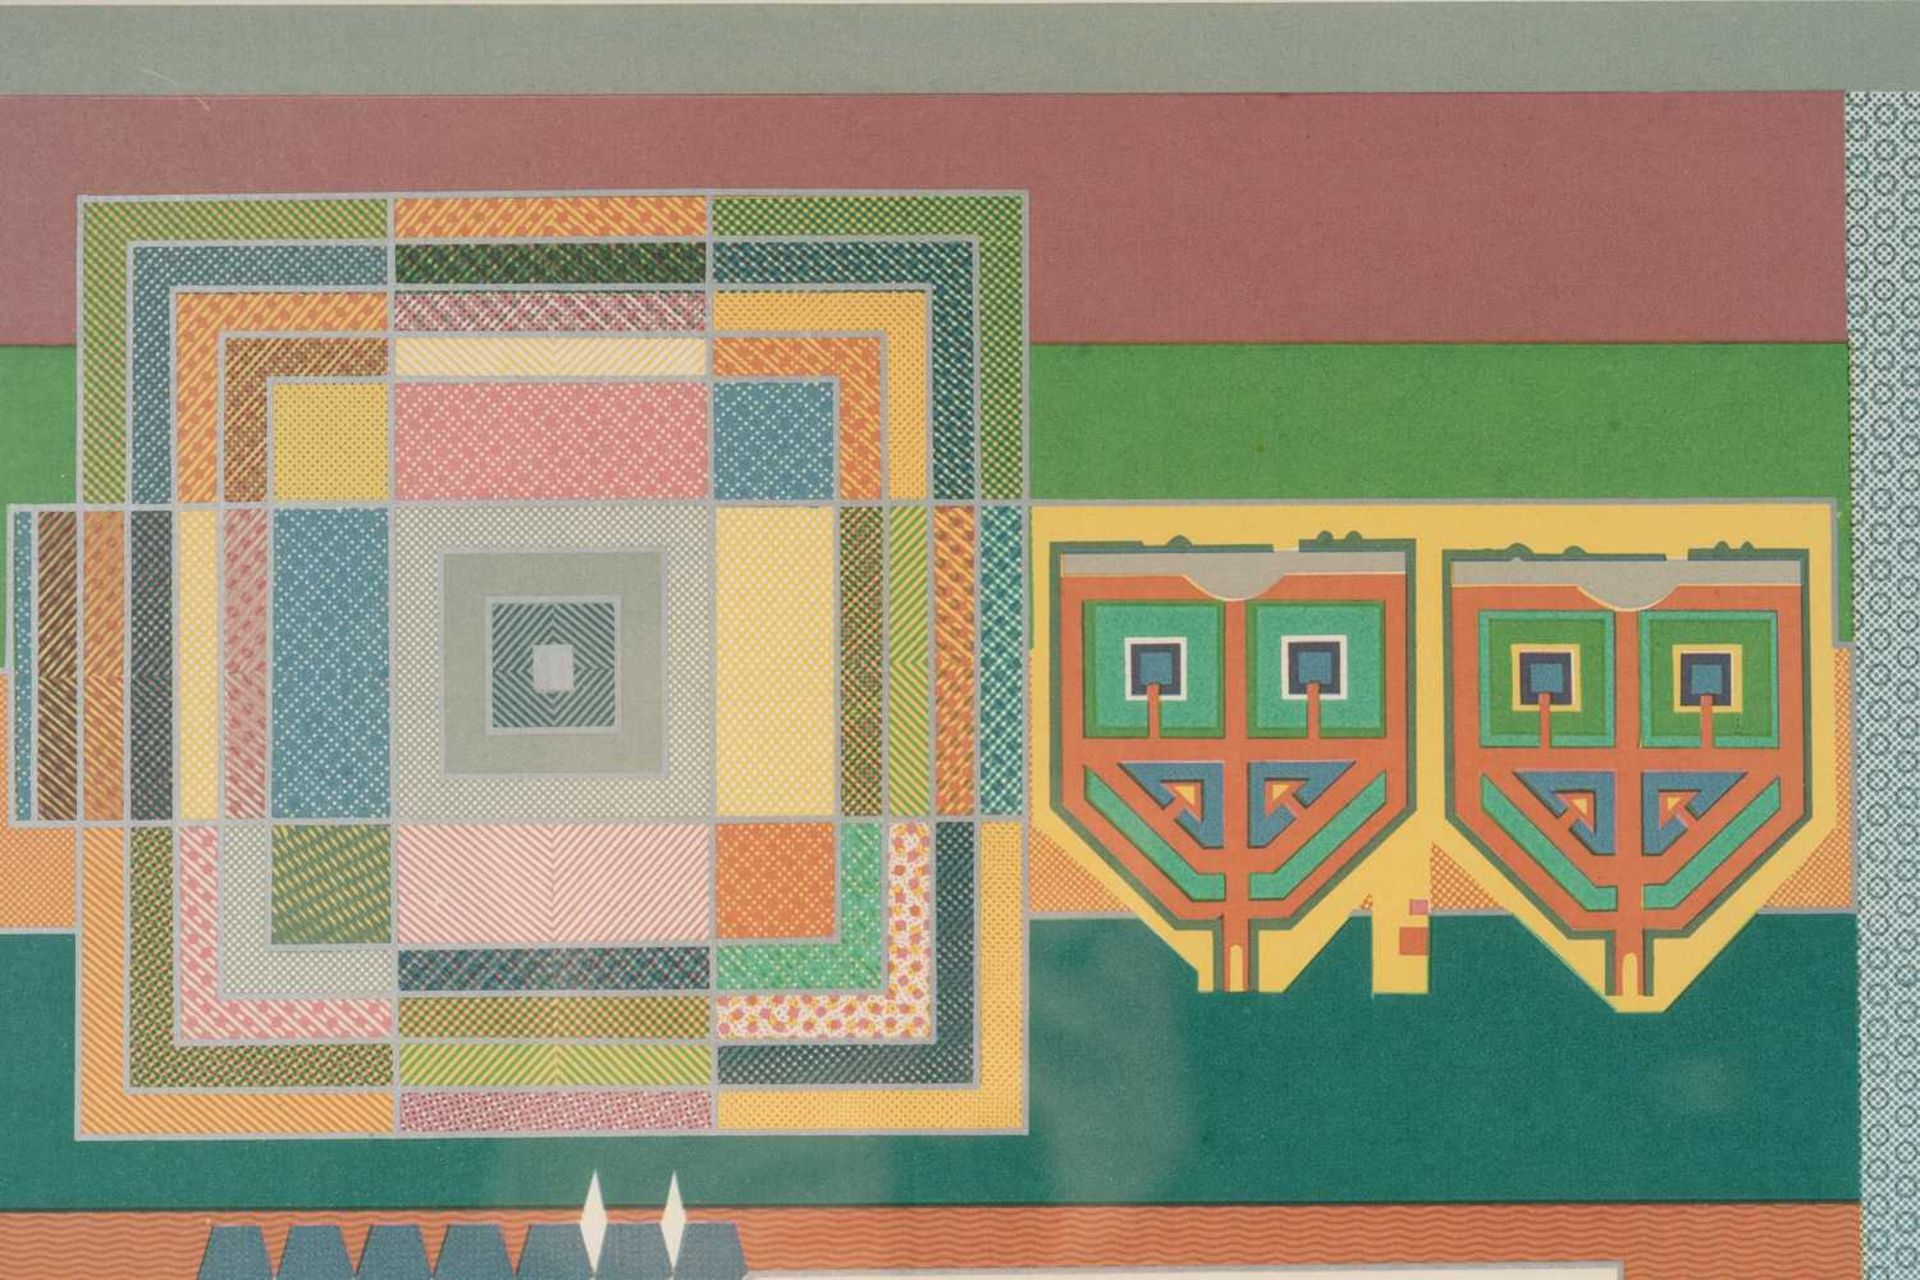 Eduardo Paolozzi (1924 - 2005), Poster for Habitat, additionally inscribed in gold ink 'Made for - Image 8 of 10